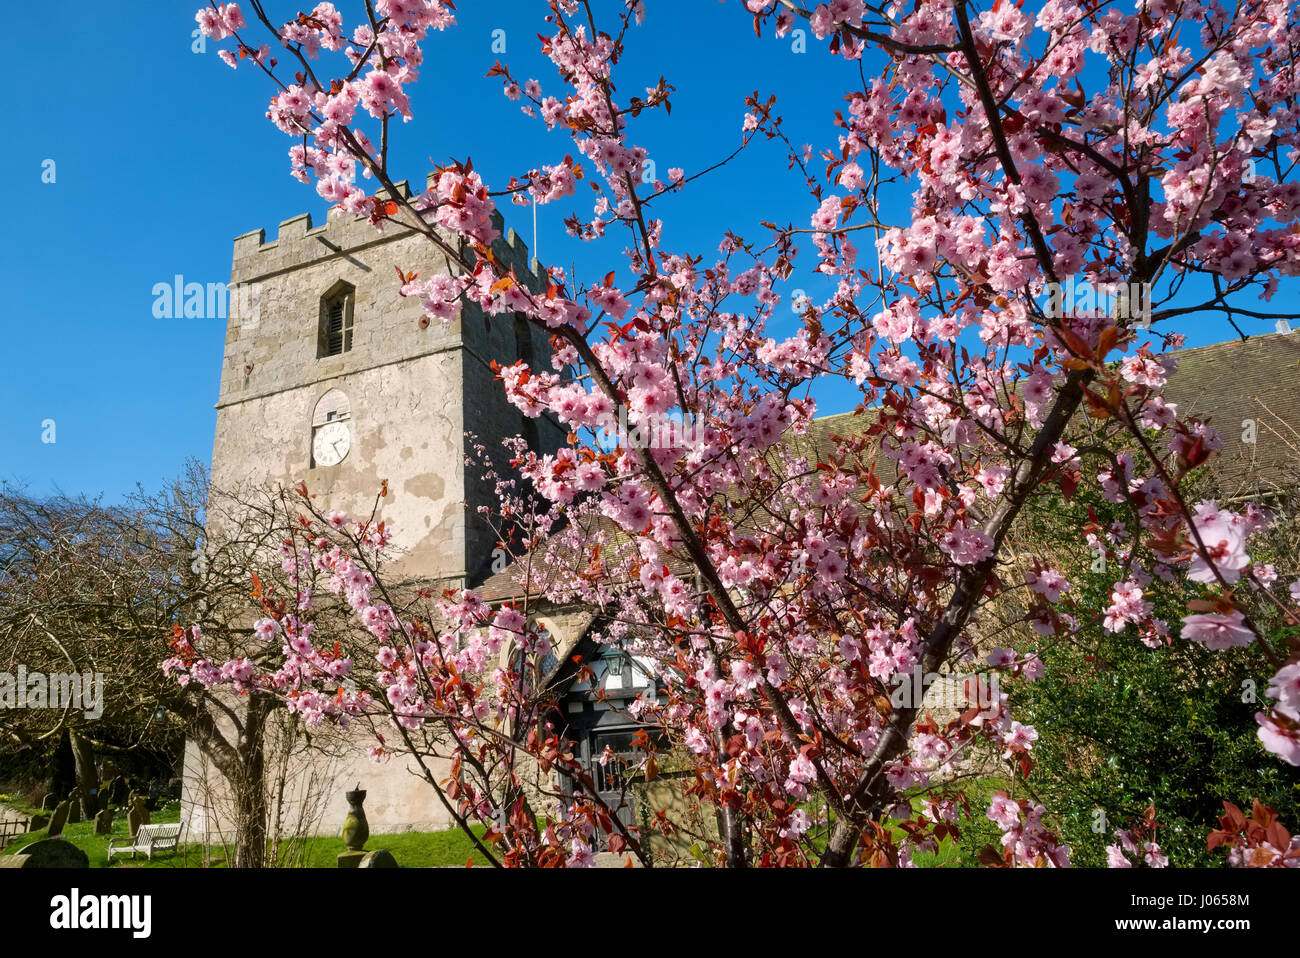 Spring blossom outside St James' Church in the village of Cardington, Shropshire. Stock Photo